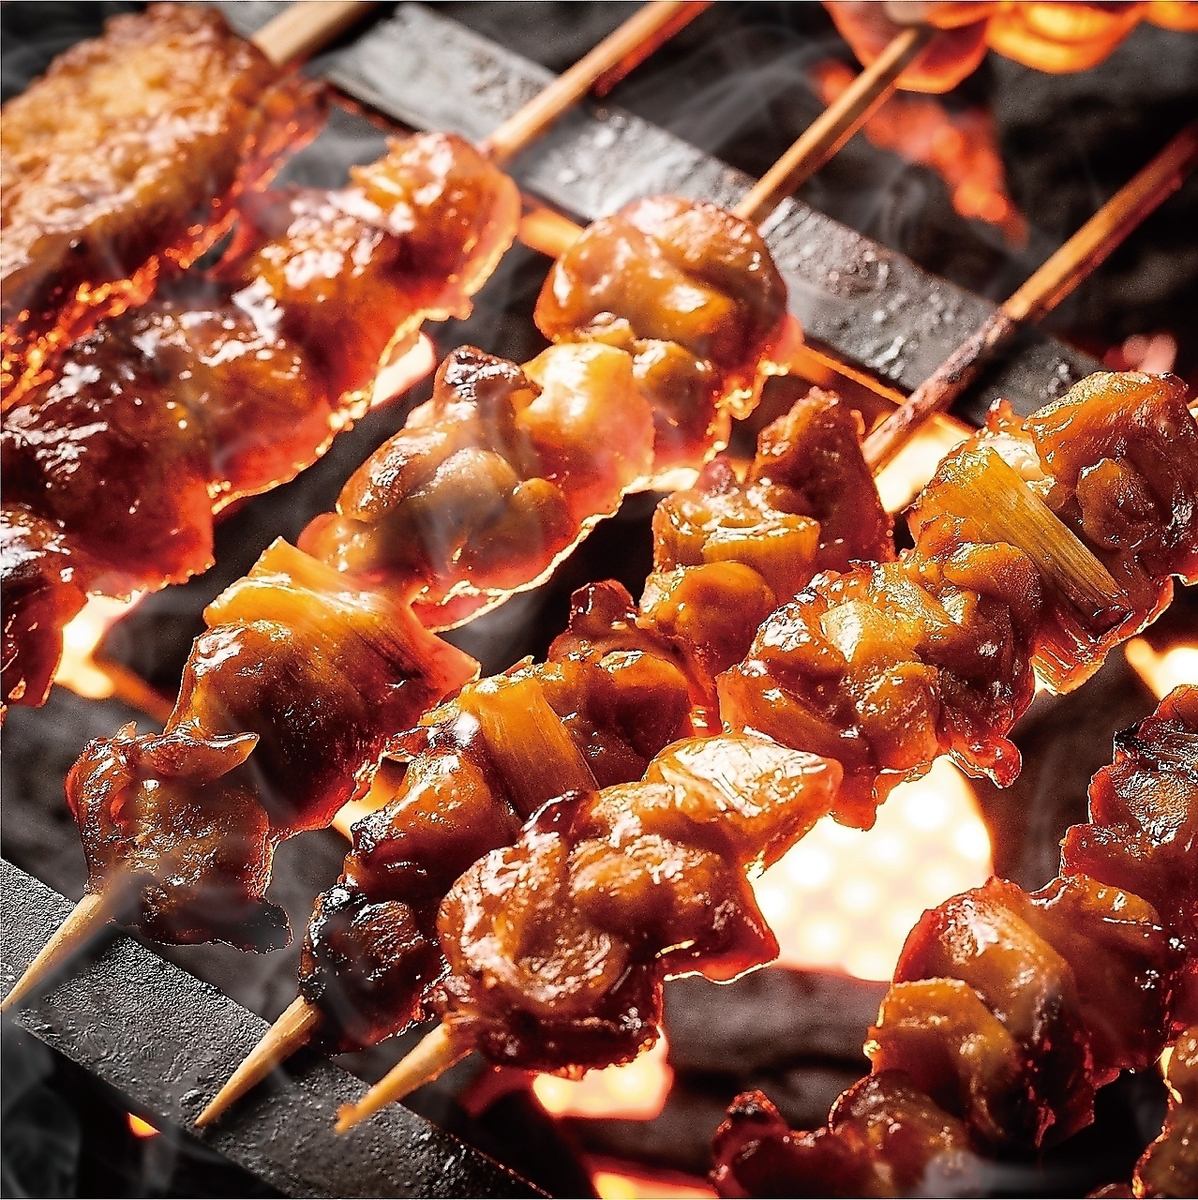 [Open Festival] Yakitori + Meat Sushi + Japanese cuisine (105 items in total) All-you-can-eat and drink 3 hours 3,000 yen